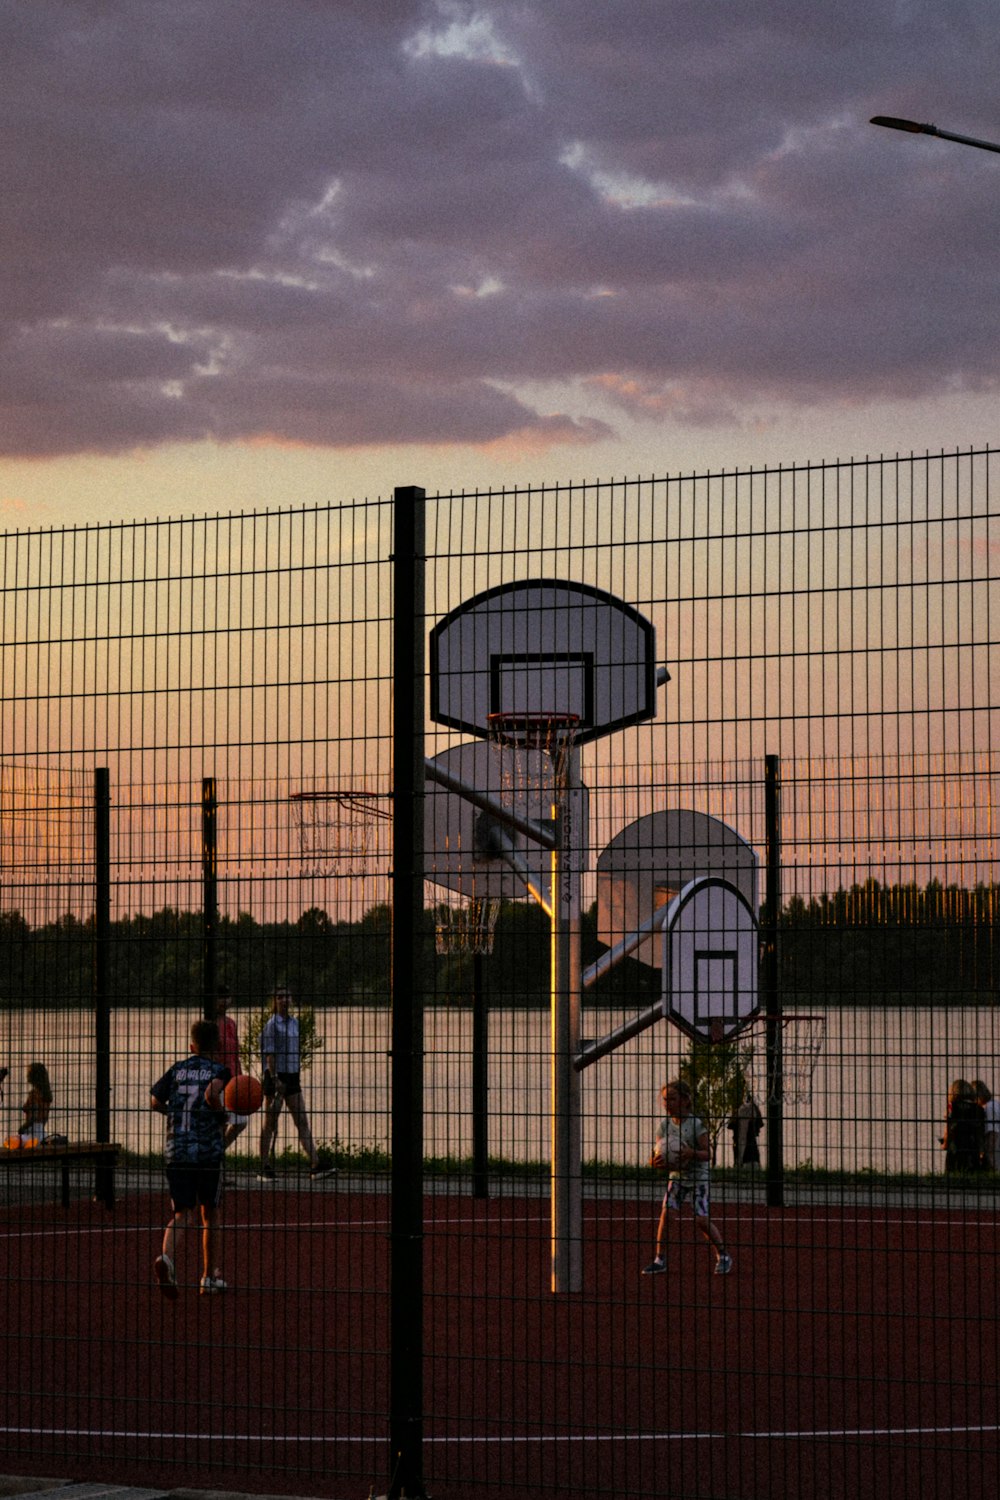 a group of people playing basketball on a basketball court